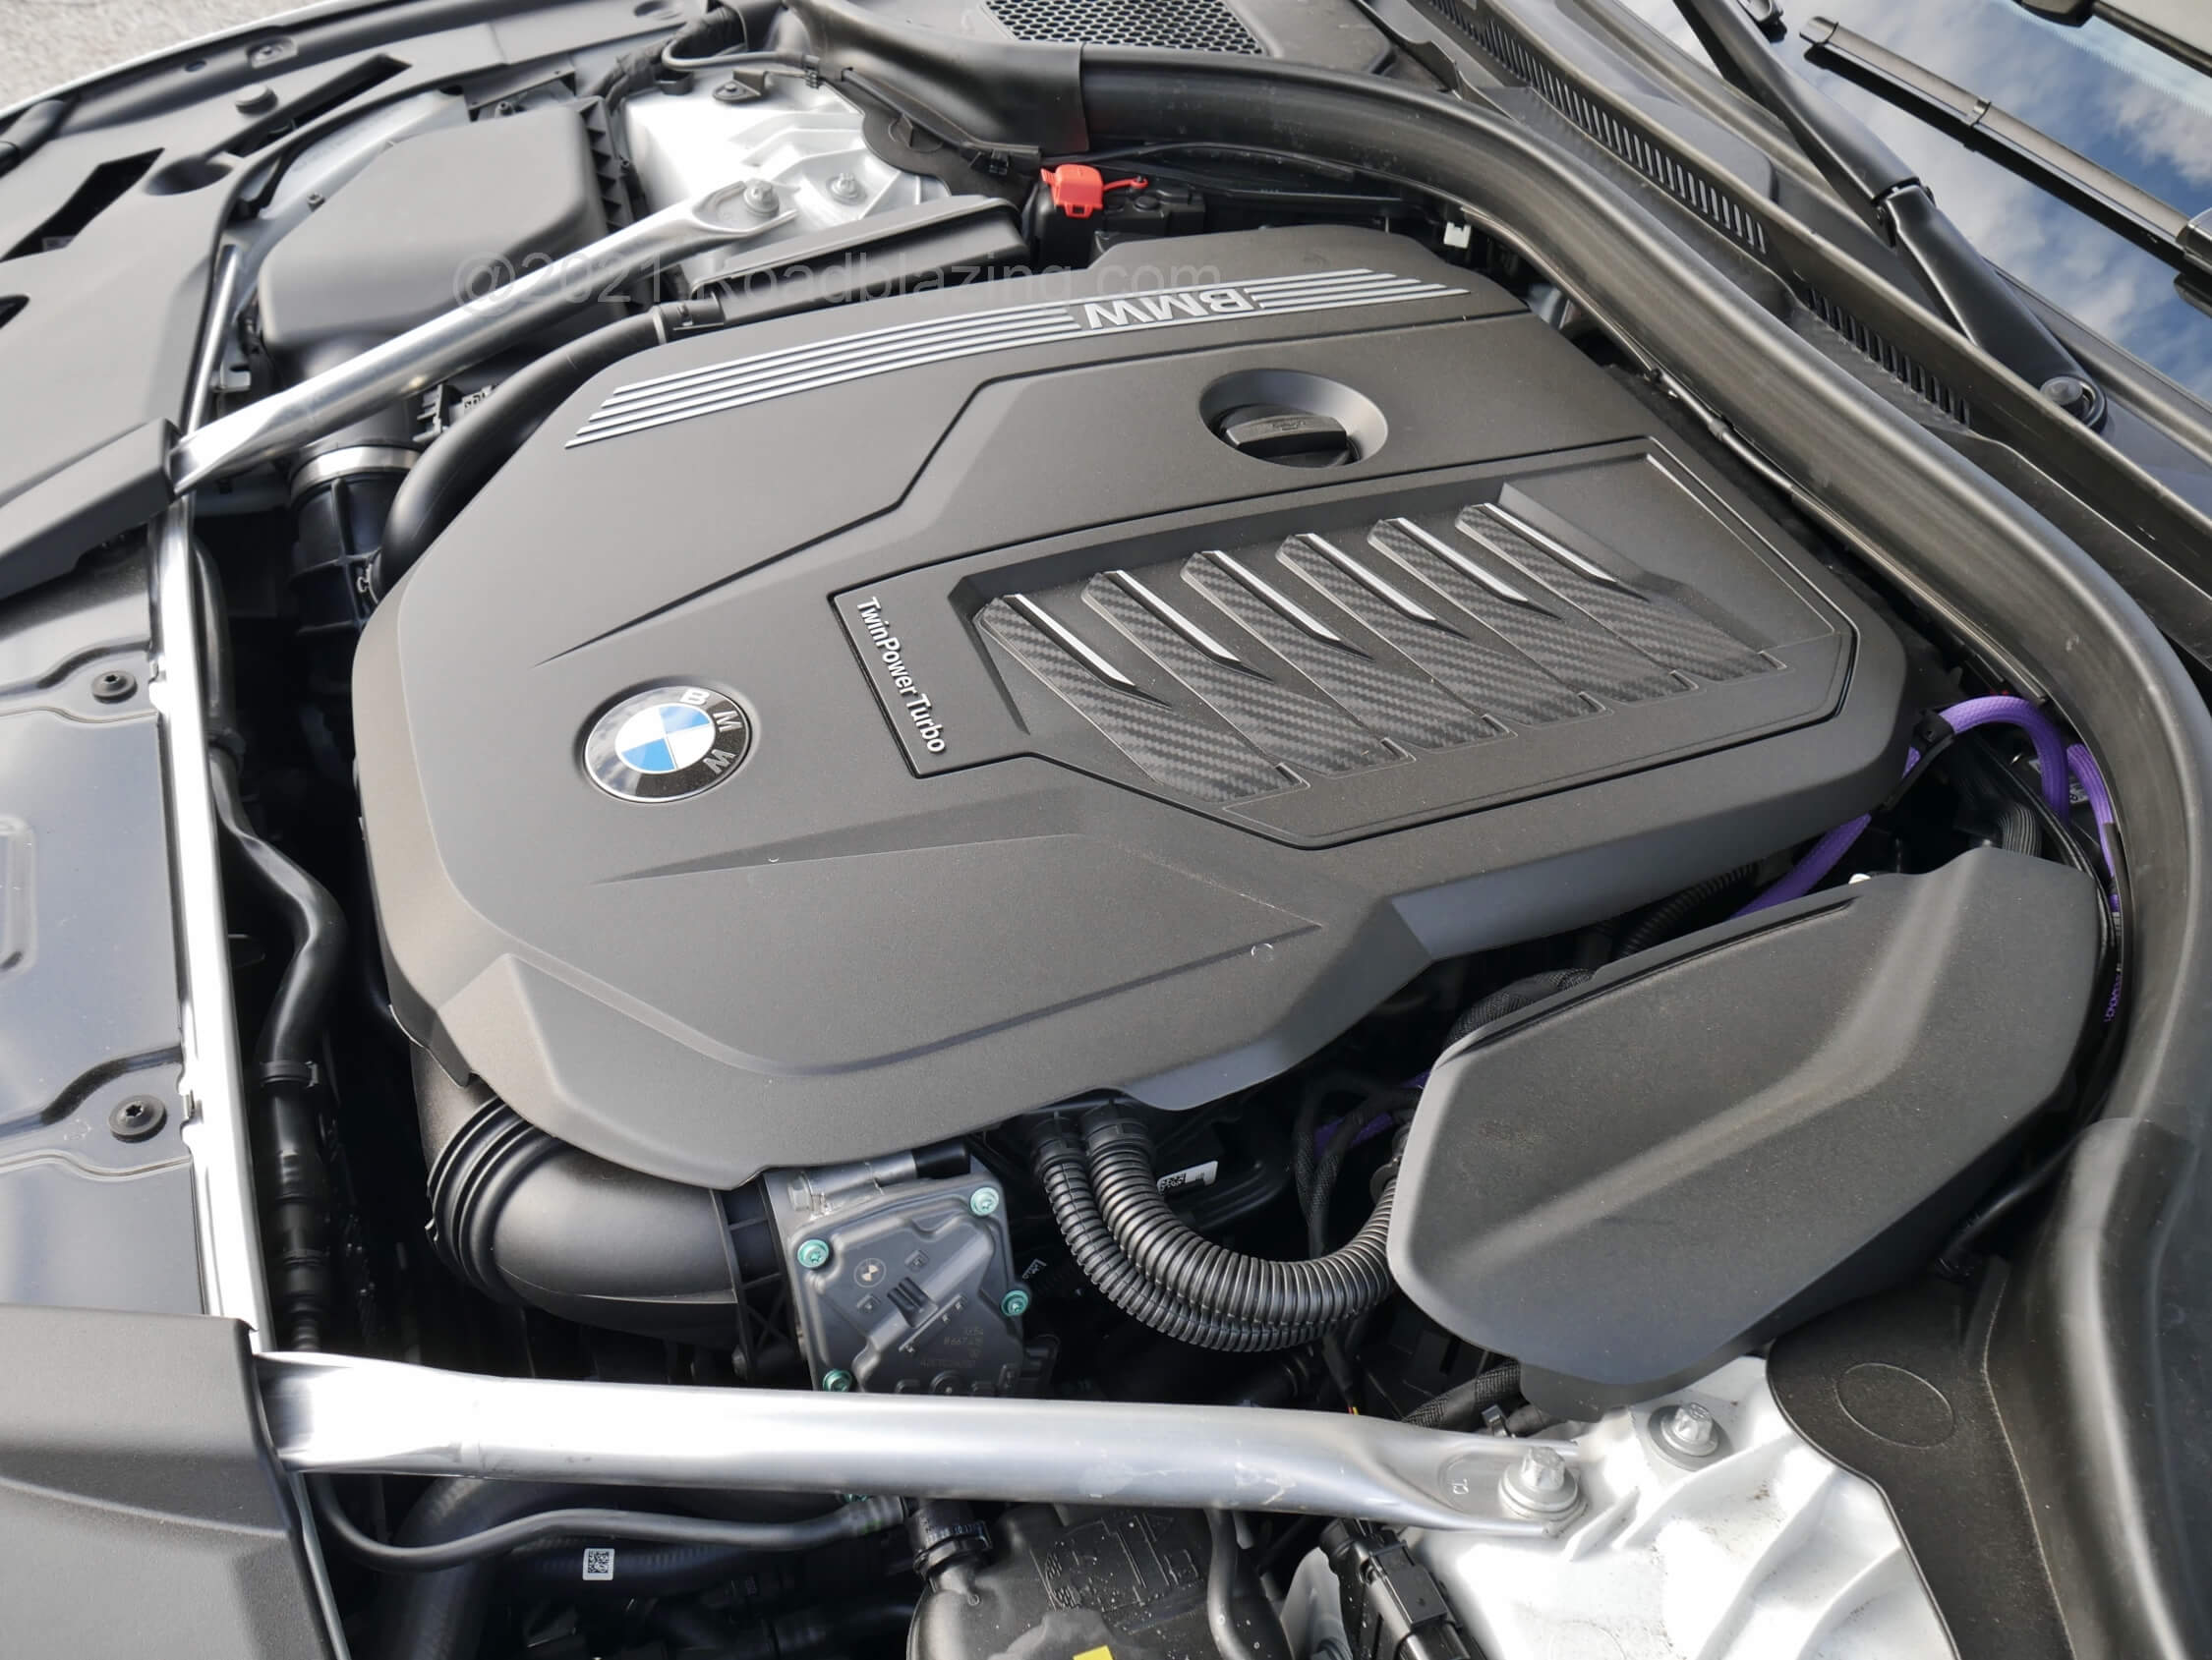 2021 BMW 540i xDrive: purple colored wiring harness on left side of engine intake cover betrays the 48 Volt mild hybrid regenerative generator motor which reduces parasitic losses